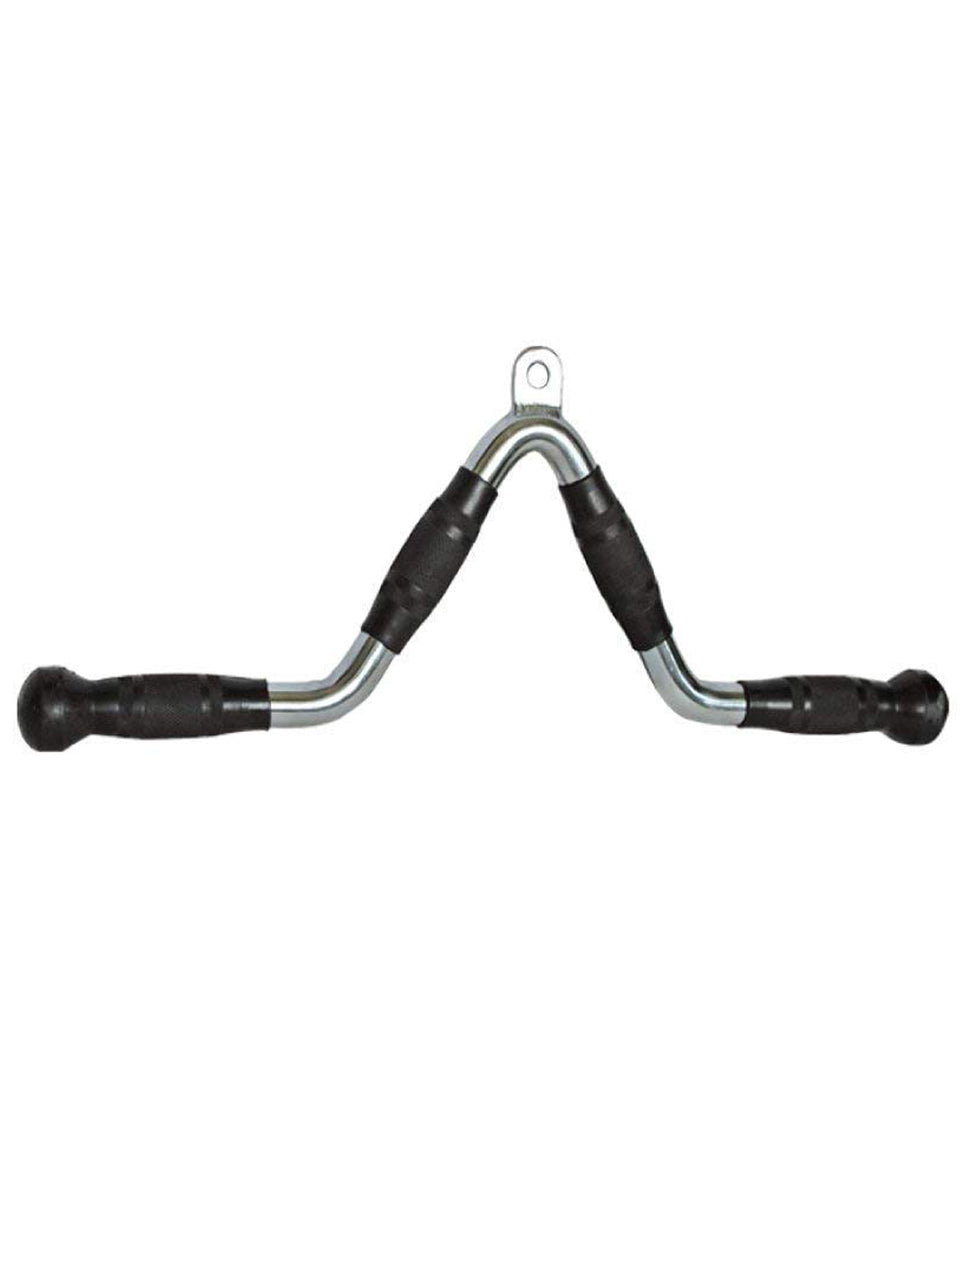 1441 Fitness Lat Attachment - V Bar with Rubber Grip End Lat Pull Down Cable